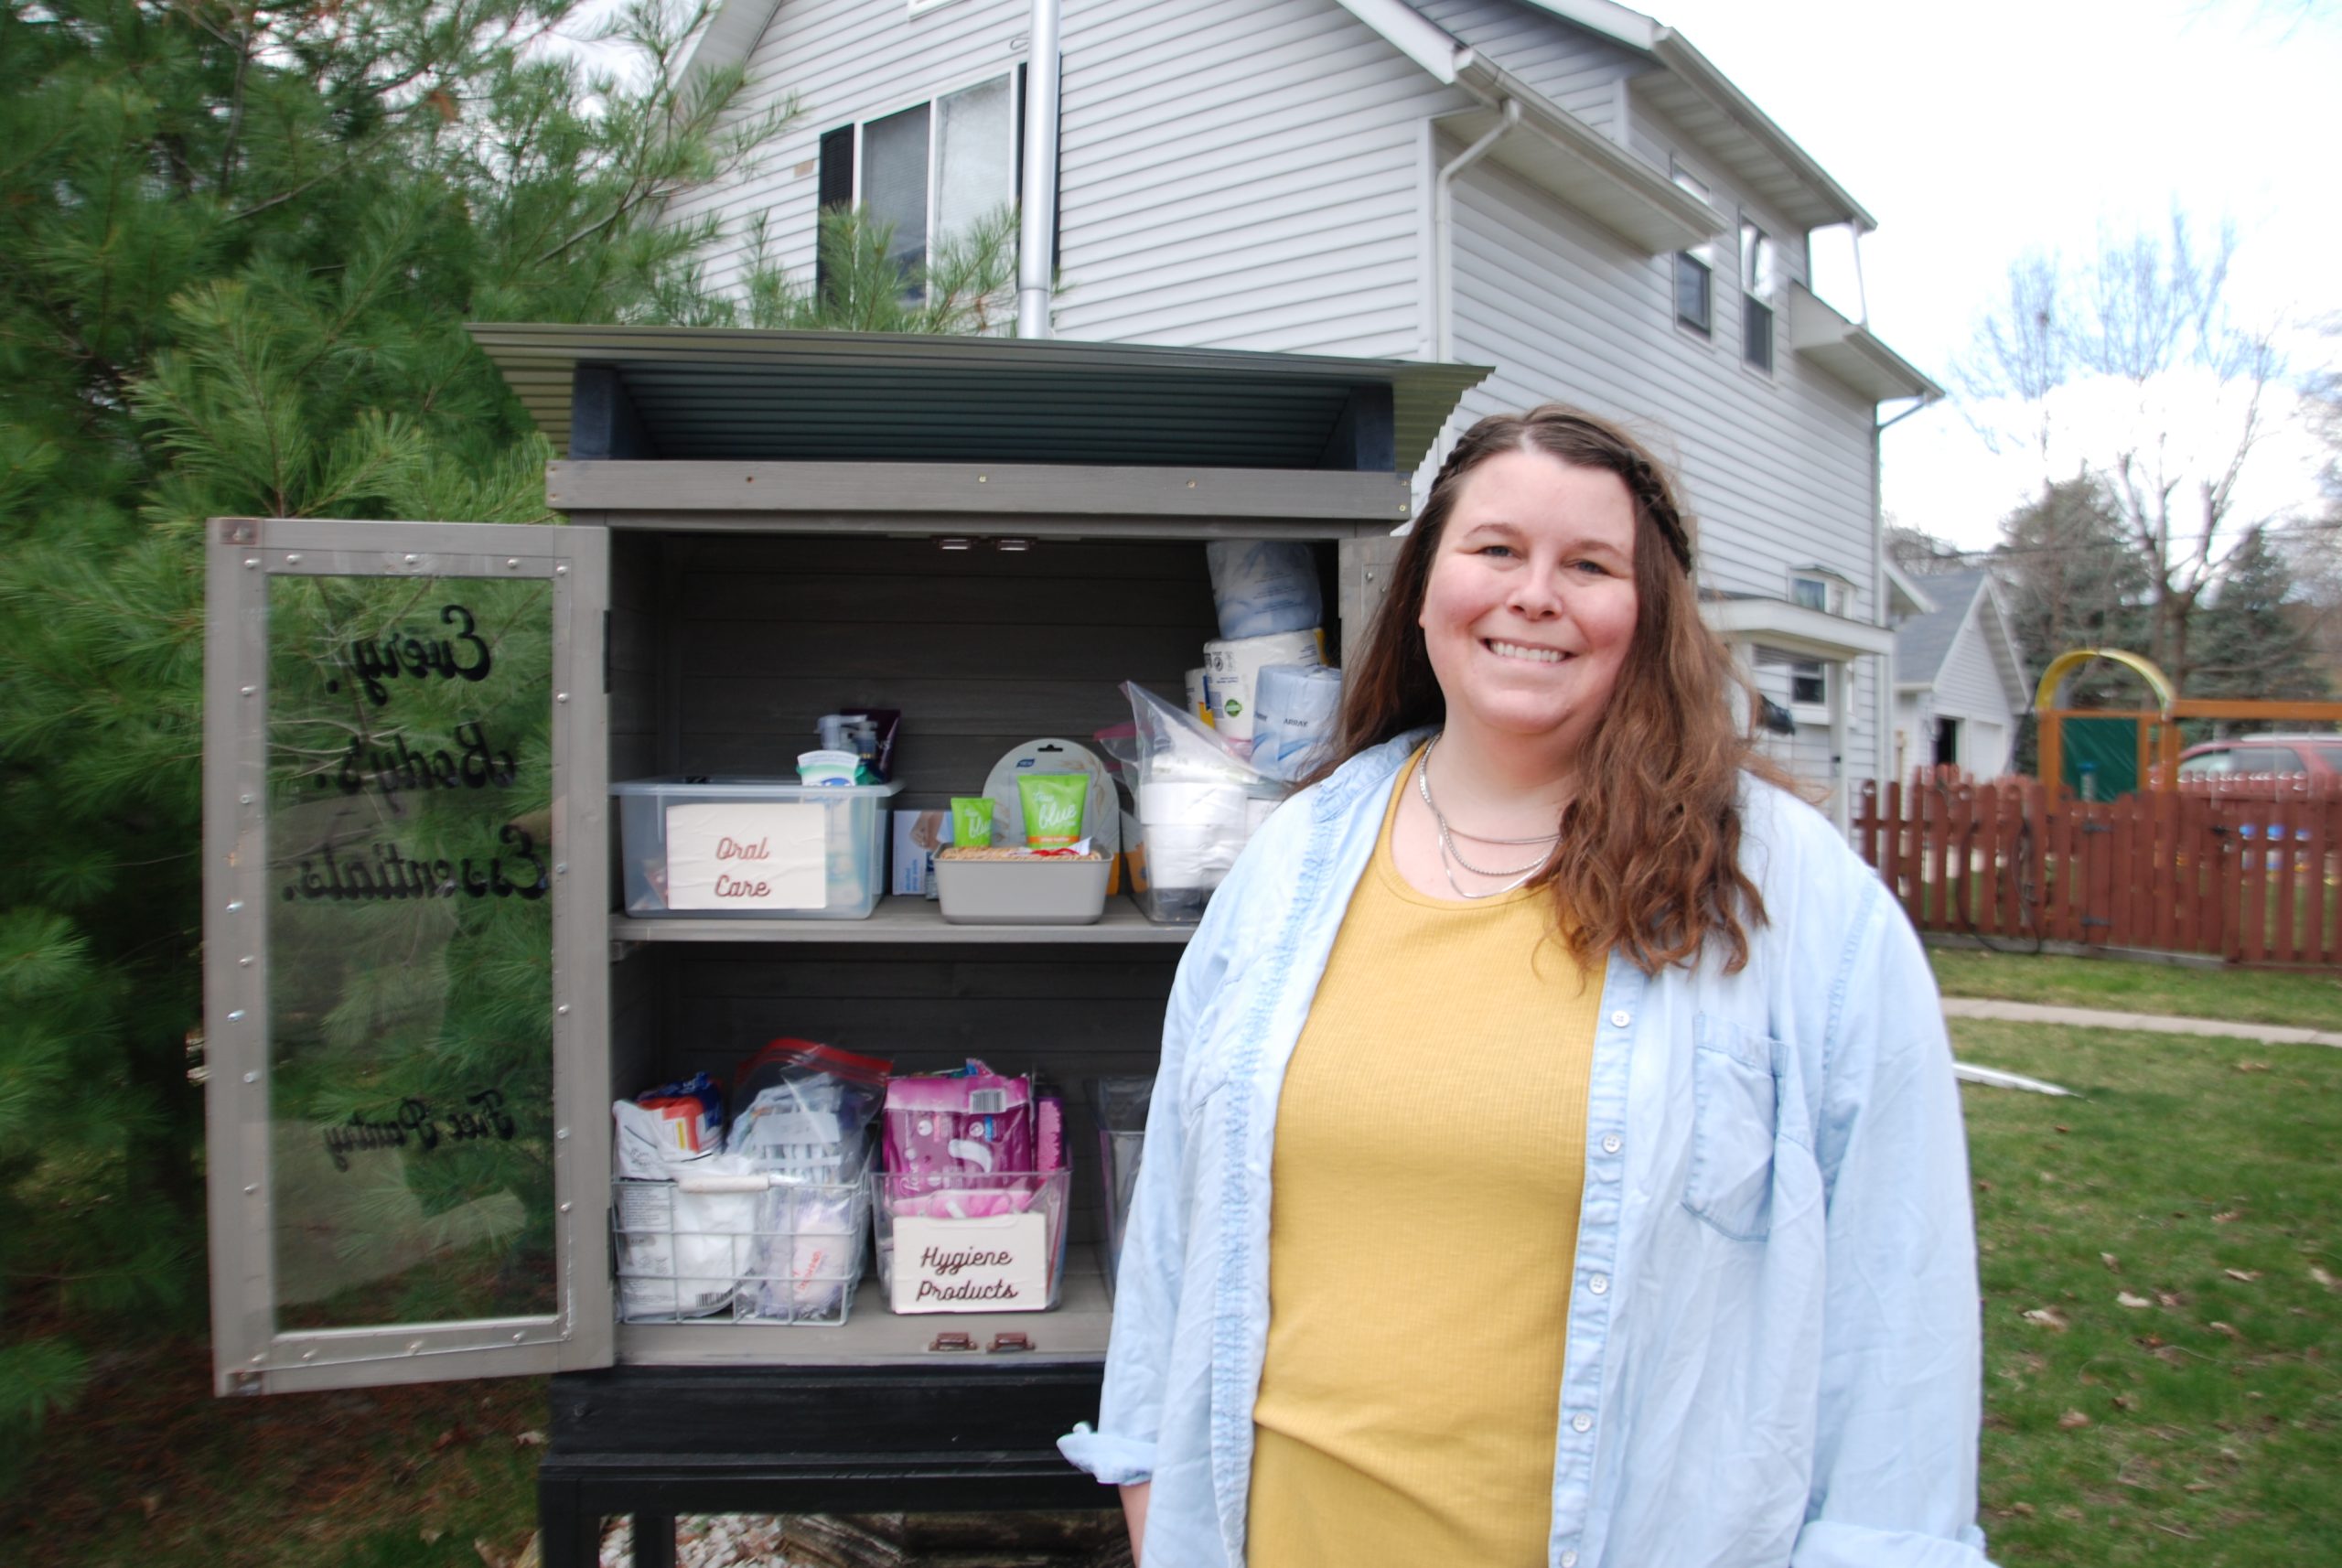 ‘Little personal hygiene supplies pantry’ serves community members in Fort